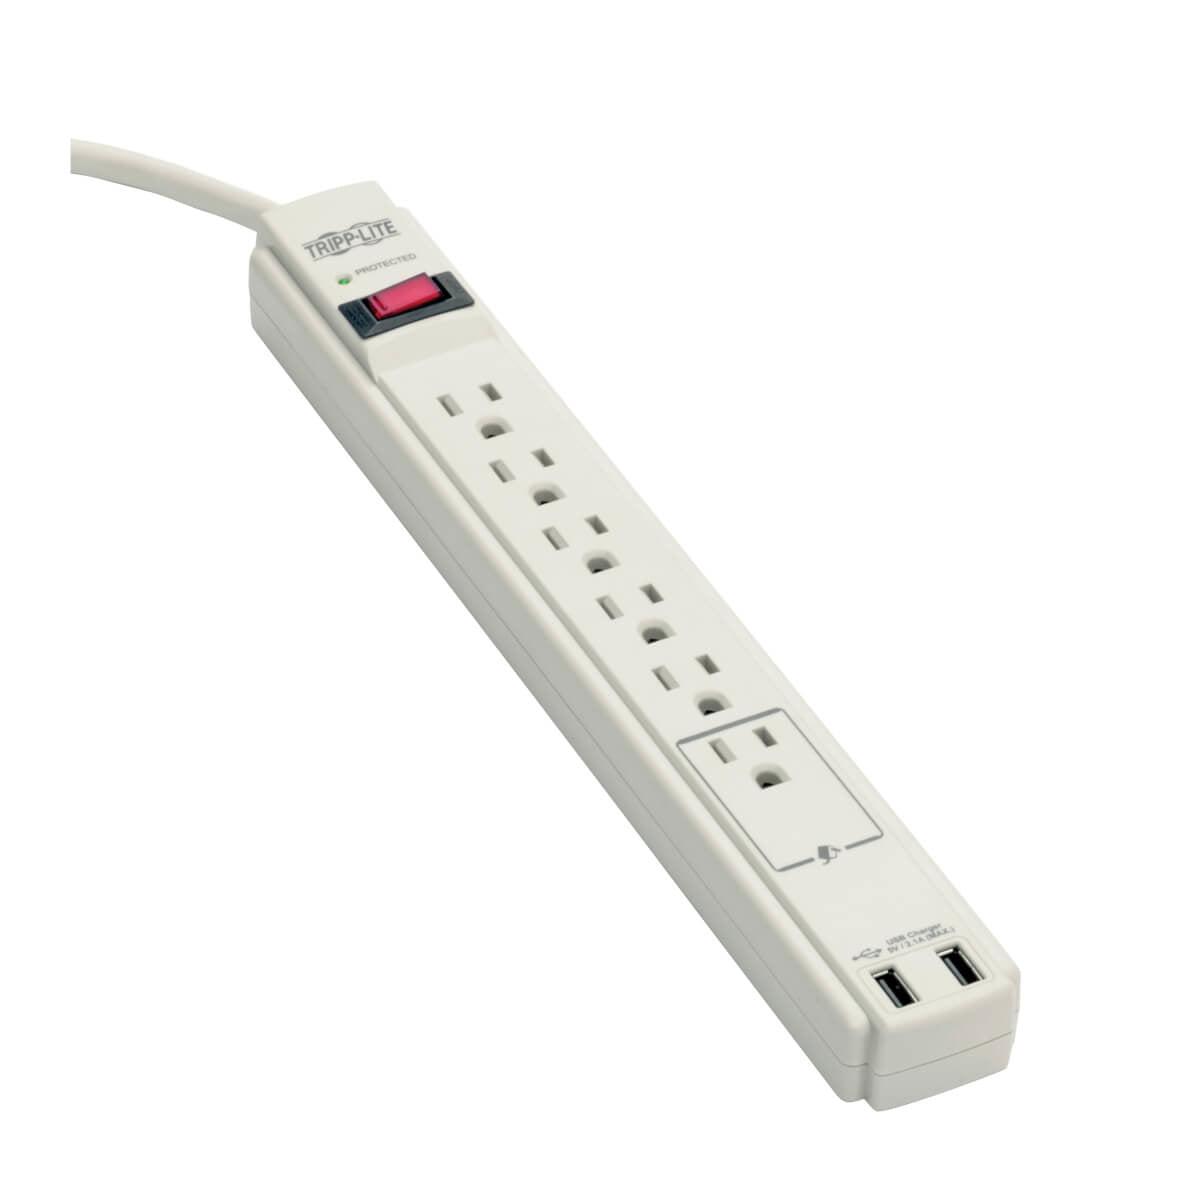 Tripp Lite Protect It! 6-Outlet Surge Protector, 6-Ft. Cord, 990 Joules, 2 X Usb Charging Ports (2.1A), Gray Housing